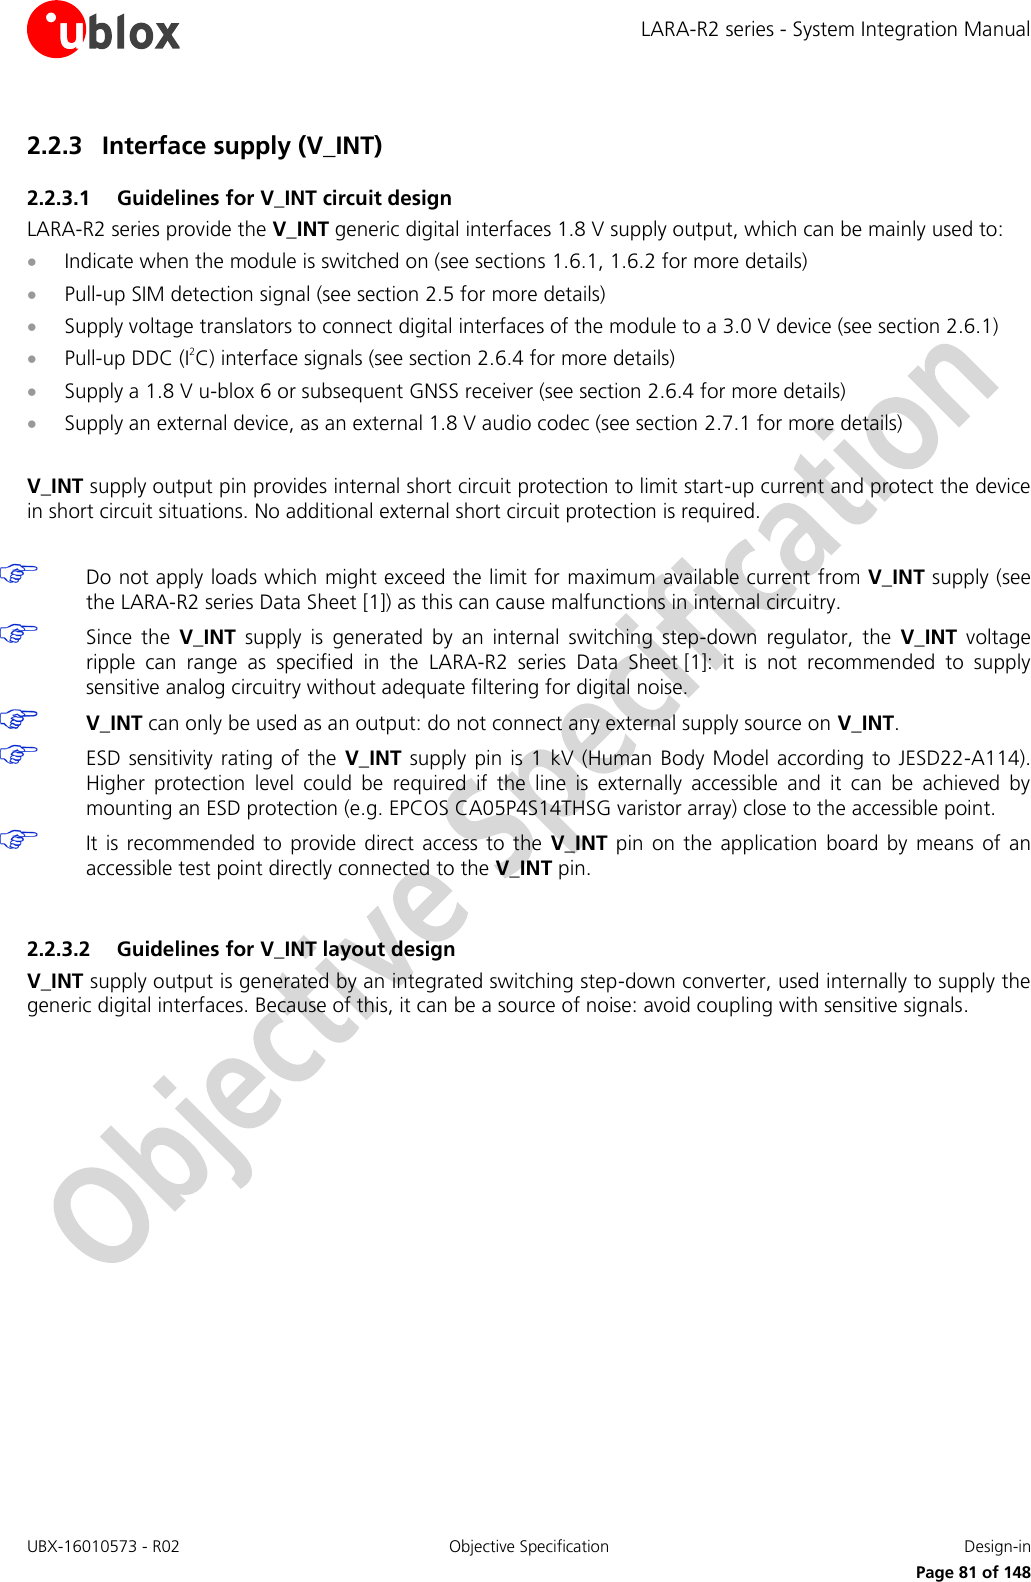 LARA-R2 series - System Integration Manual UBX-16010573 - R02  Objective Specification  Design-in     Page 81 of 148 2.2.3 Interface supply (V_INT) 2.2.3.1 Guidelines for V_INT circuit design LARA-R2 series provide the V_INT generic digital interfaces 1.8 V supply output, which can be mainly used to:  Indicate when the module is switched on (see sections 1.6.1, 1.6.2 for more details)  Pull-up SIM detection signal (see section 2.5 for more details)  Supply voltage translators to connect digital interfaces of the module to a 3.0 V device (see section 2.6.1)  Pull-up DDC (I2C) interface signals (see section 2.6.4 for more details)  Supply a 1.8 V u-blox 6 or subsequent GNSS receiver (see section 2.6.4 for more details)  Supply an external device, as an external 1.8 V audio codec (see section 2.7.1 for more details)  V_INT supply output pin provides internal short circuit protection to limit start-up current and protect the device in short circuit situations. No additional external short circuit protection is required.   Do not apply loads which might exceed the limit for maximum available current from V_INT supply (see the LARA-R2 series Data Sheet [1]) as this can cause malfunctions in internal circuitry.  Since  the  V_INT  supply  is  generated  by  an  internal  switching  step-down  regulator,  the  V_INT  voltage ripple  can  range  as  specified  in  the  LARA-R2  series Data  Sheet [1]:  it  is  not  recommended  to  supply sensitive analog circuitry without adequate filtering for digital noise.  V_INT can only be used as an output: do not connect any external supply source on V_INT.  ESD sensitivity rating of the  V_INT  supply pin  is 1 kV  (Human Body  Model according to JESD22-A114). Higher  protection  level  could  be  required  if  the  line  is  externally  accessible  and  it  can  be  achieved  by mounting an ESD protection (e.g. EPCOS CA05P4S14THSG varistor array) close to the accessible point.  It is  recommended  to  provide  direct  access  to the  V_INT  pin  on the  application  board by  means  of  an accessible test point directly connected to the V_INT pin.  2.2.3.2 Guidelines for V_INT layout design V_INT supply output is generated by an integrated switching step-down converter, used internally to supply the generic digital interfaces. Because of this, it can be a source of noise: avoid coupling with sensitive signals.  